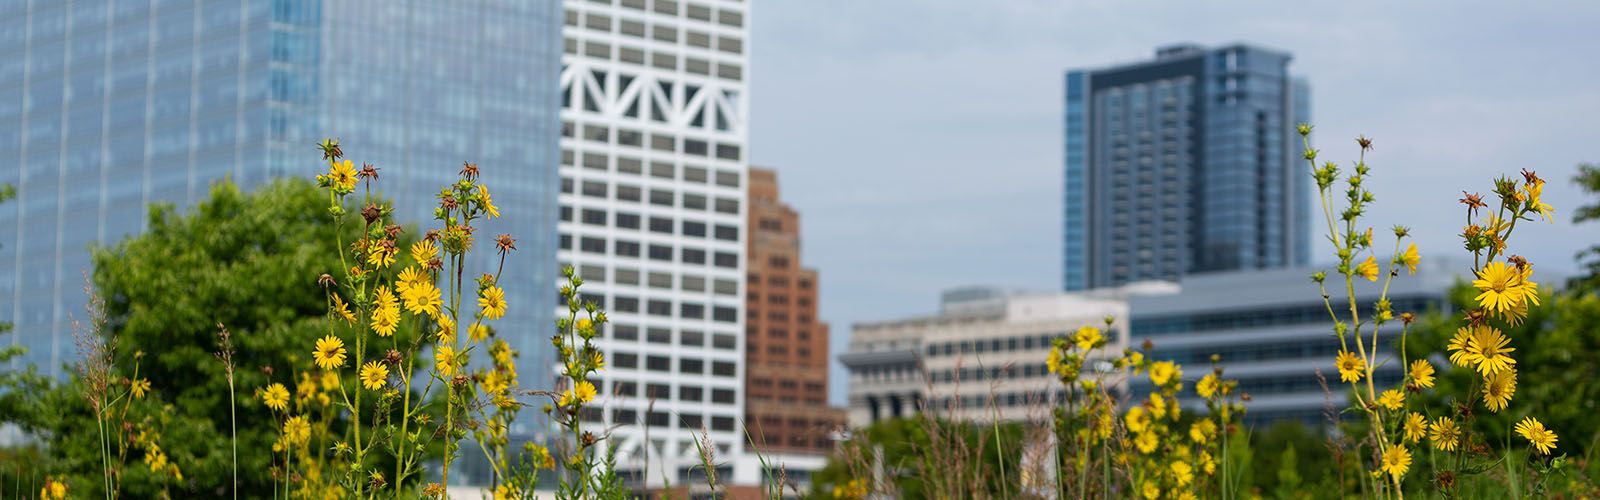 The tall stalks of a compass plant with yellow flowers in bloom in the foreground and a city with tall buildings in the background.